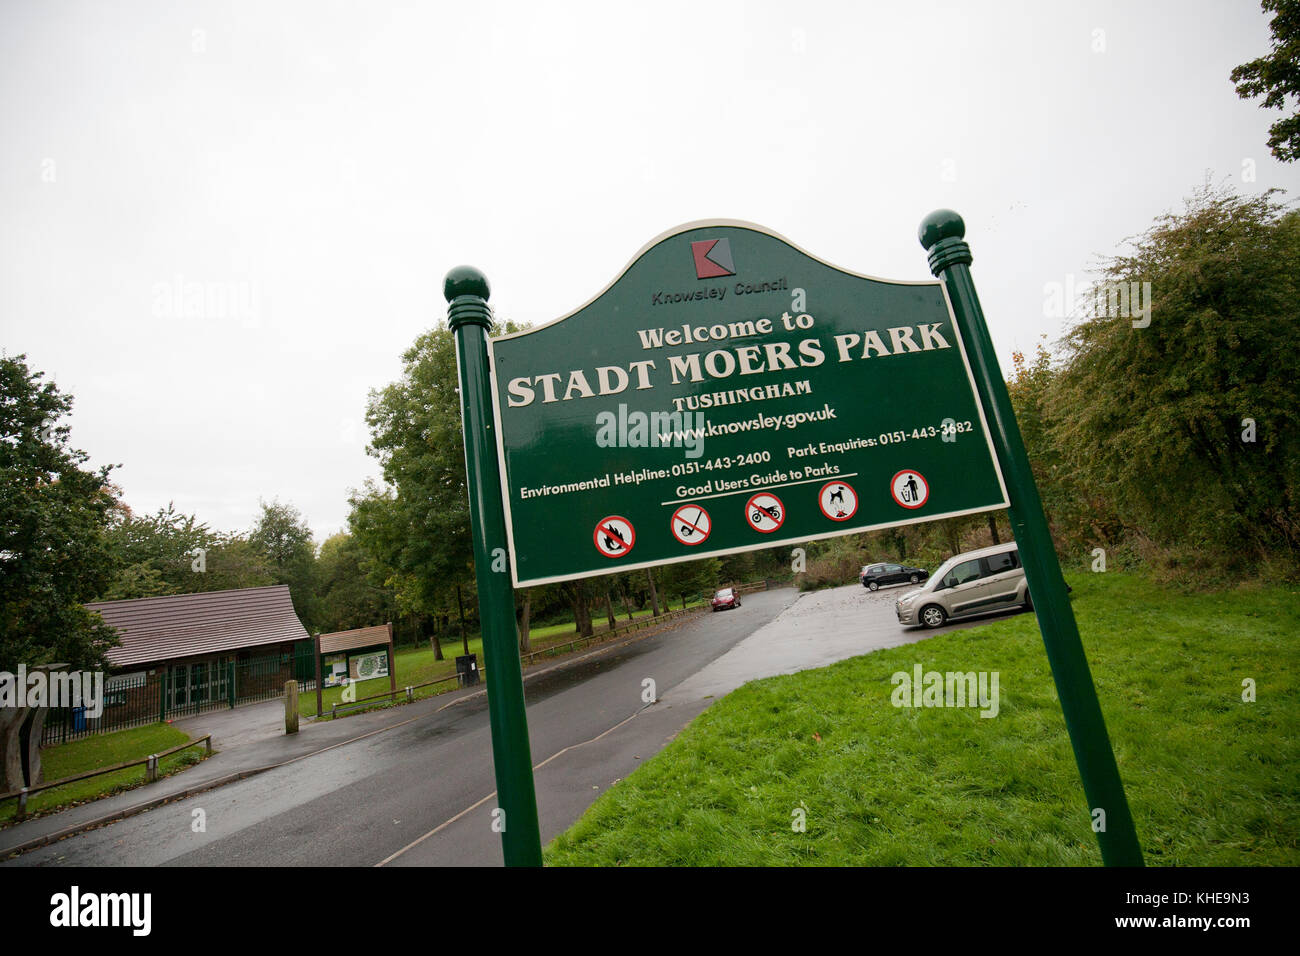 Stadt moers park, whiston, Knowsley, Merseyside, Regno Unito Foto Stock